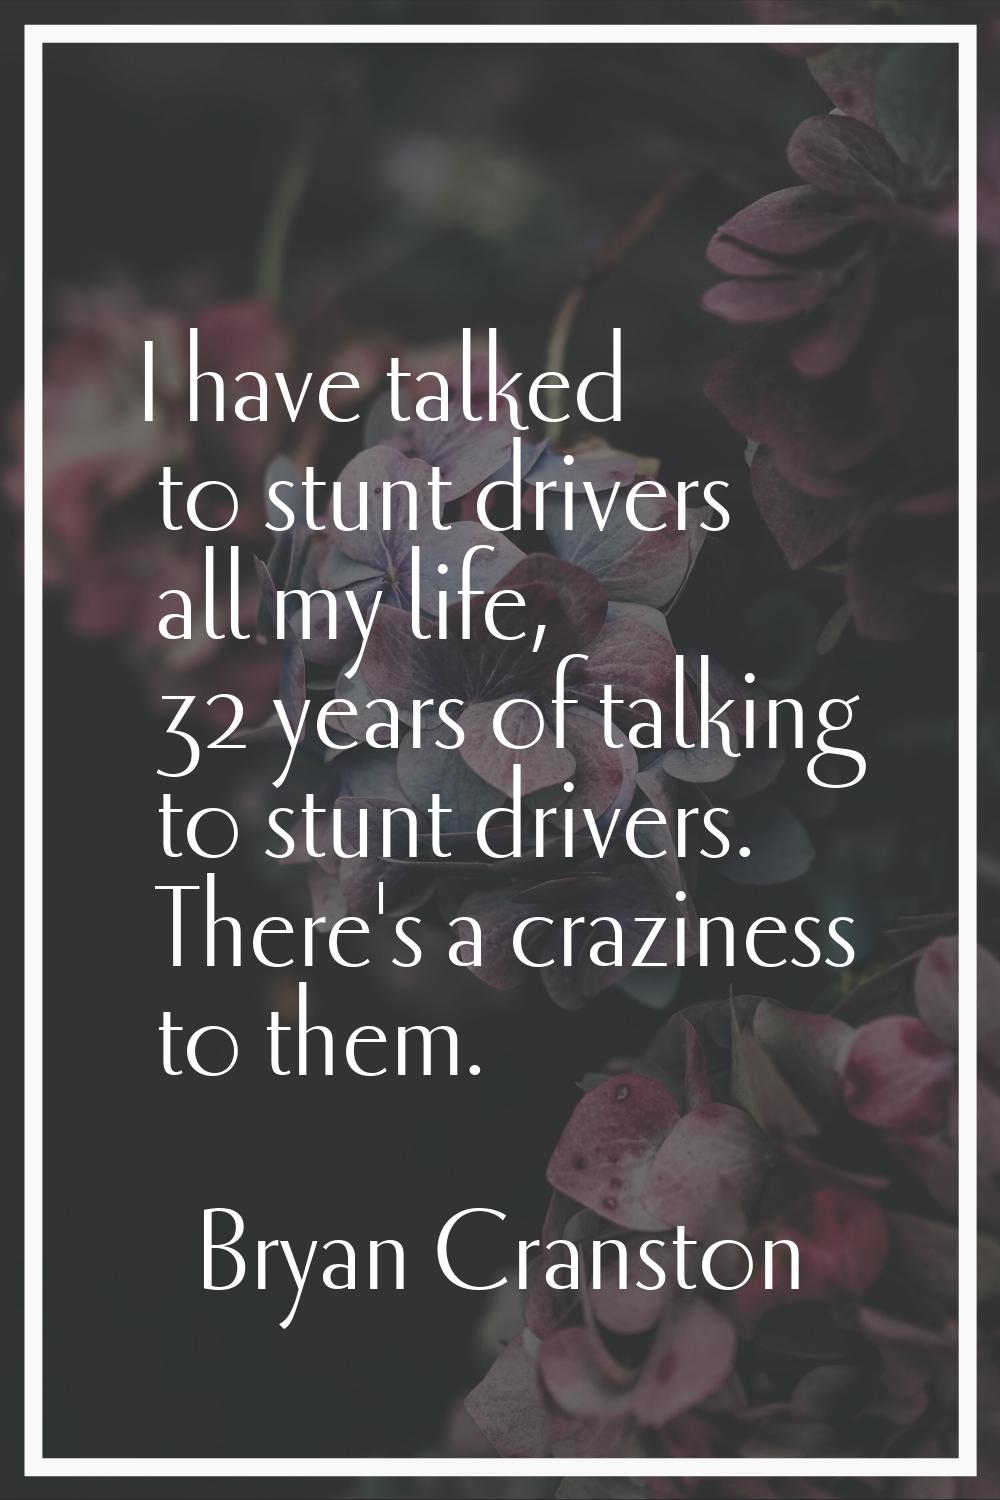 I have talked to stunt drivers all my life, 32 years of talking to stunt drivers. There's a crazine